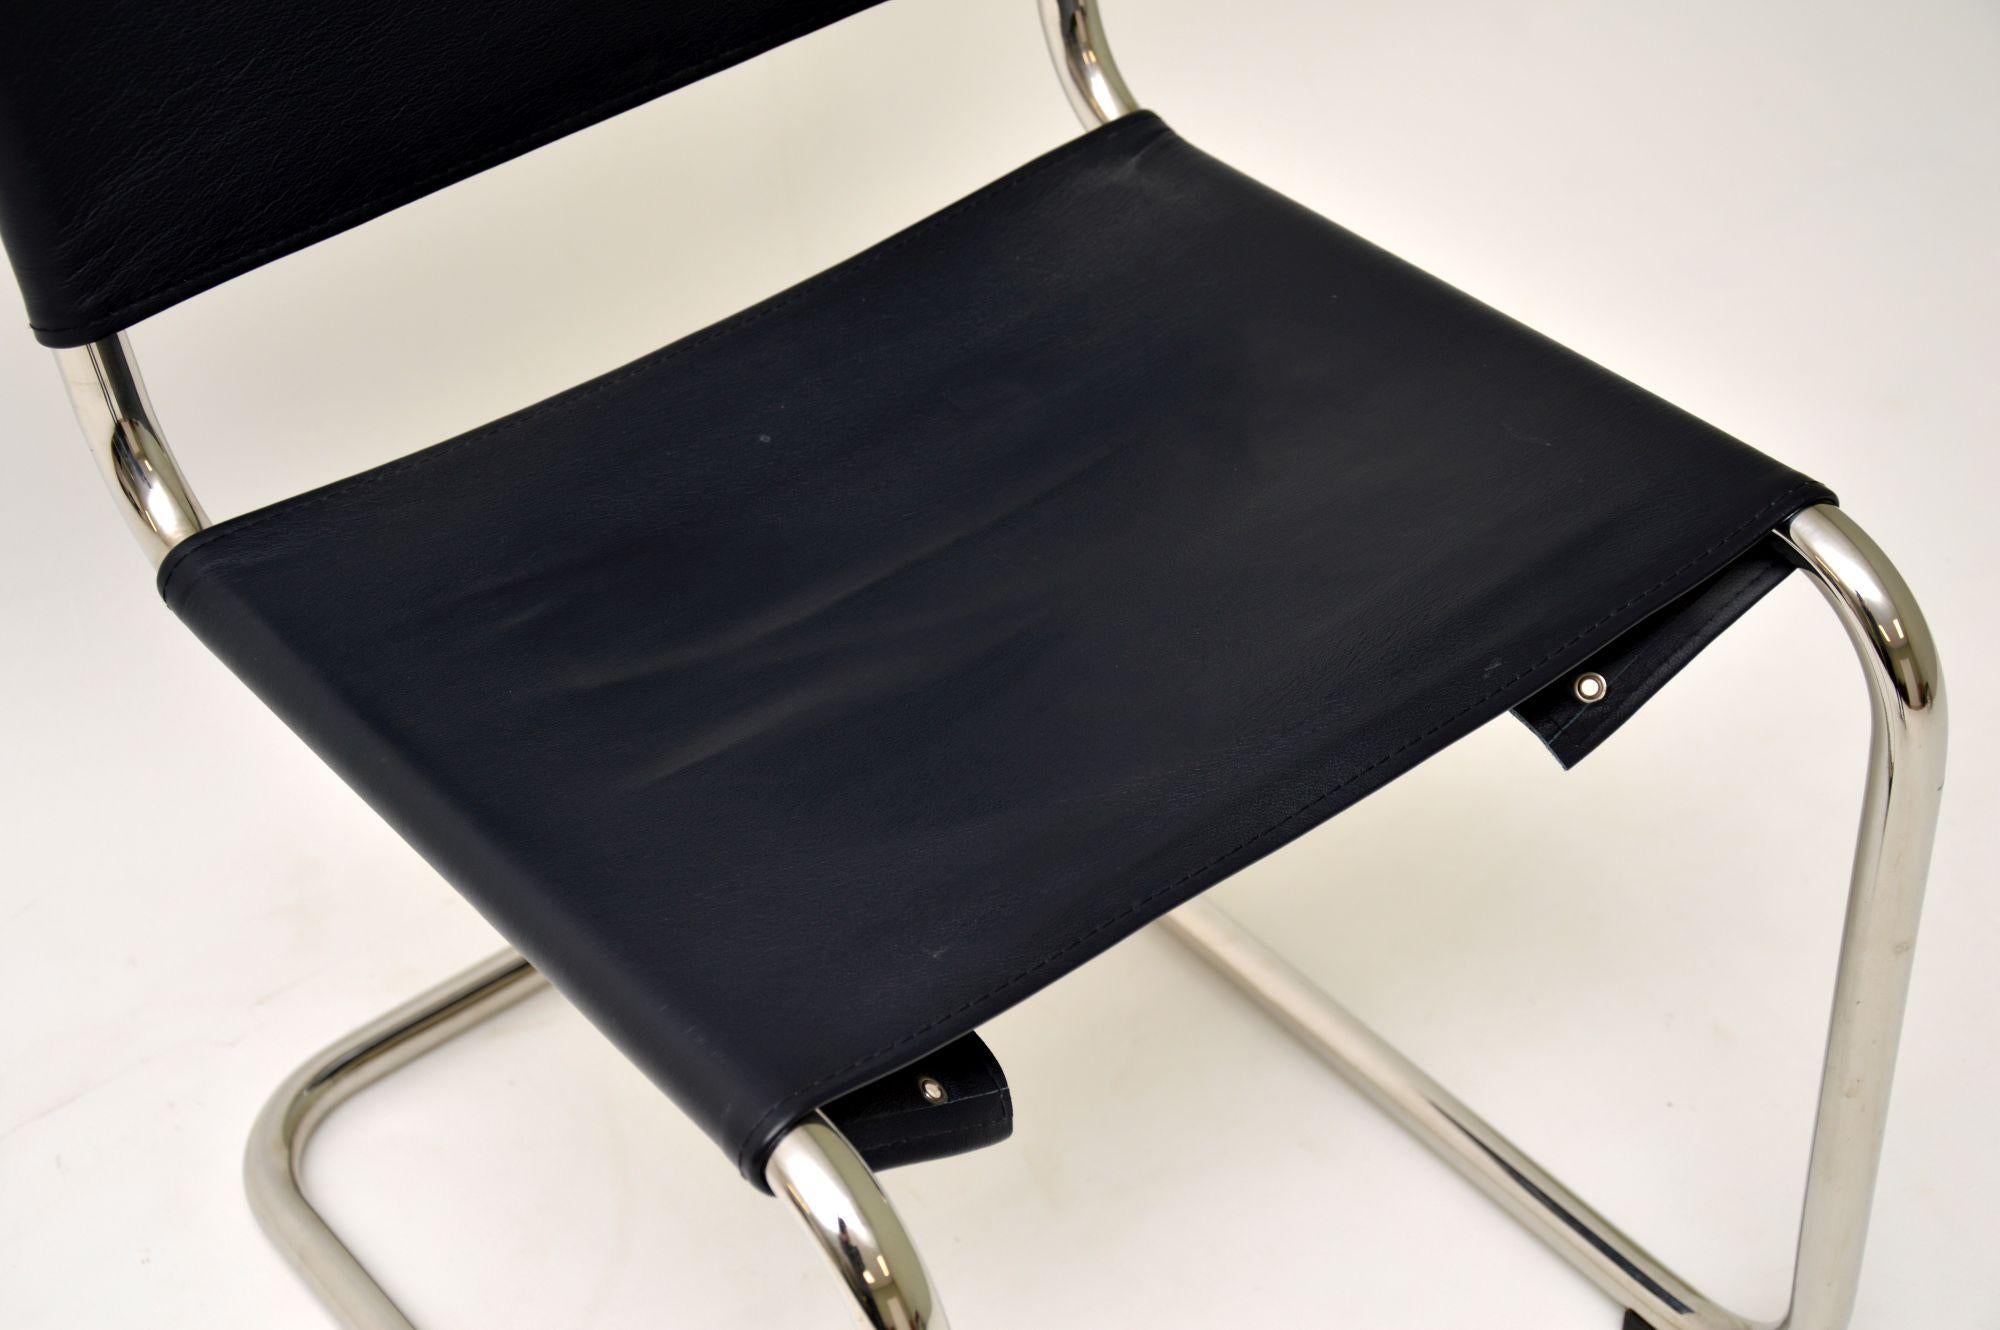 Vintage Steel and Leather Cantilever S33 Chair by Mart Stam 1